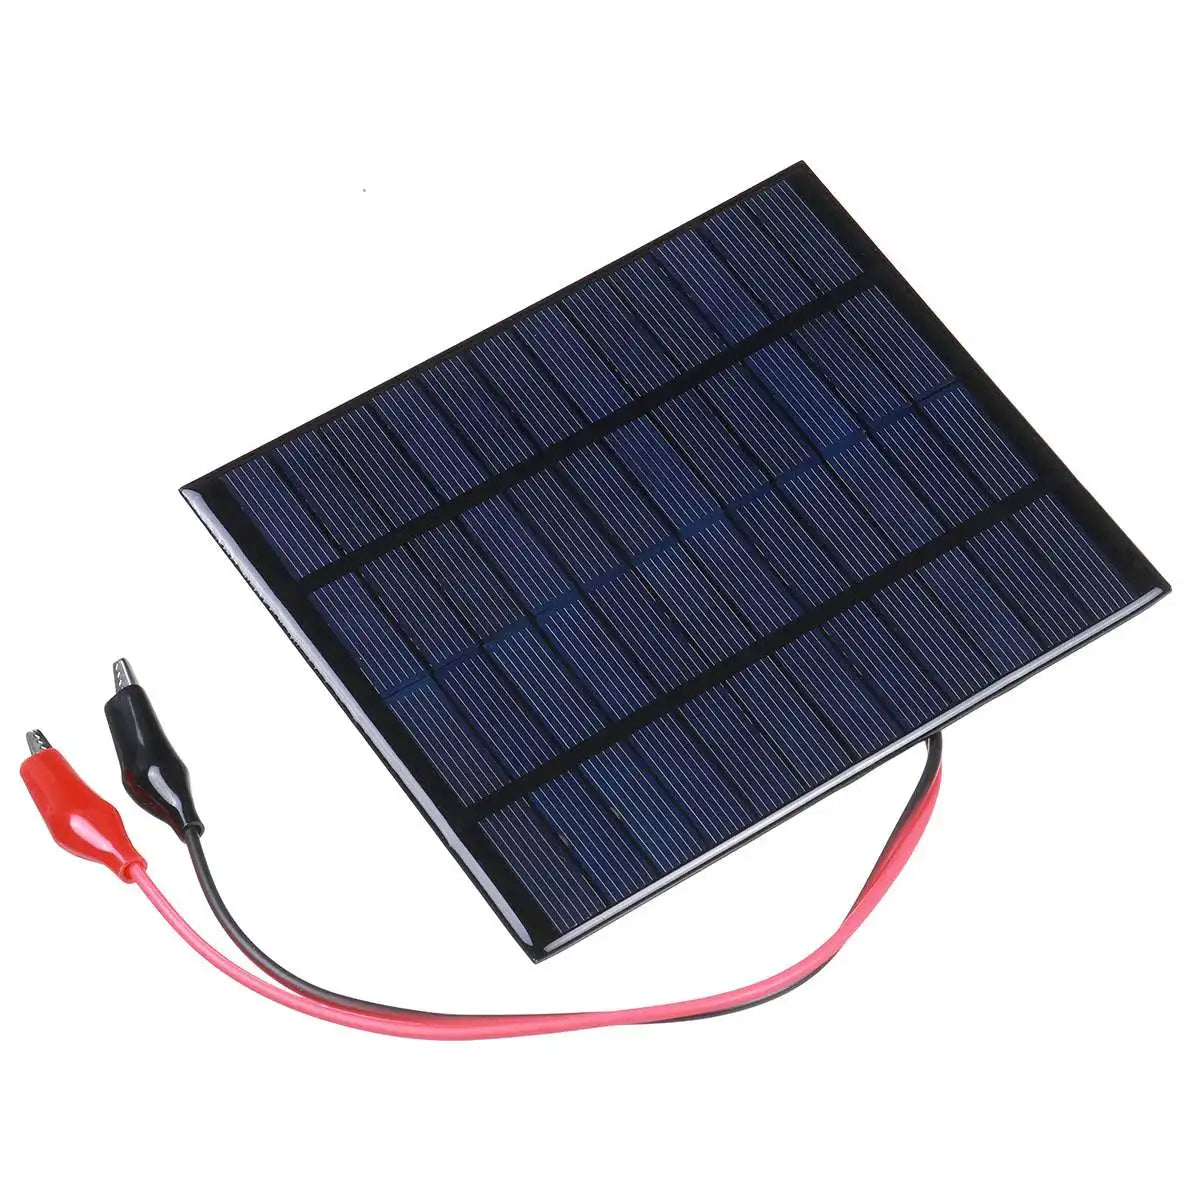 20W Solar Panel, Reliable Polycrystalline Silicon Solar Cell with Energy-Saving Charging Solution